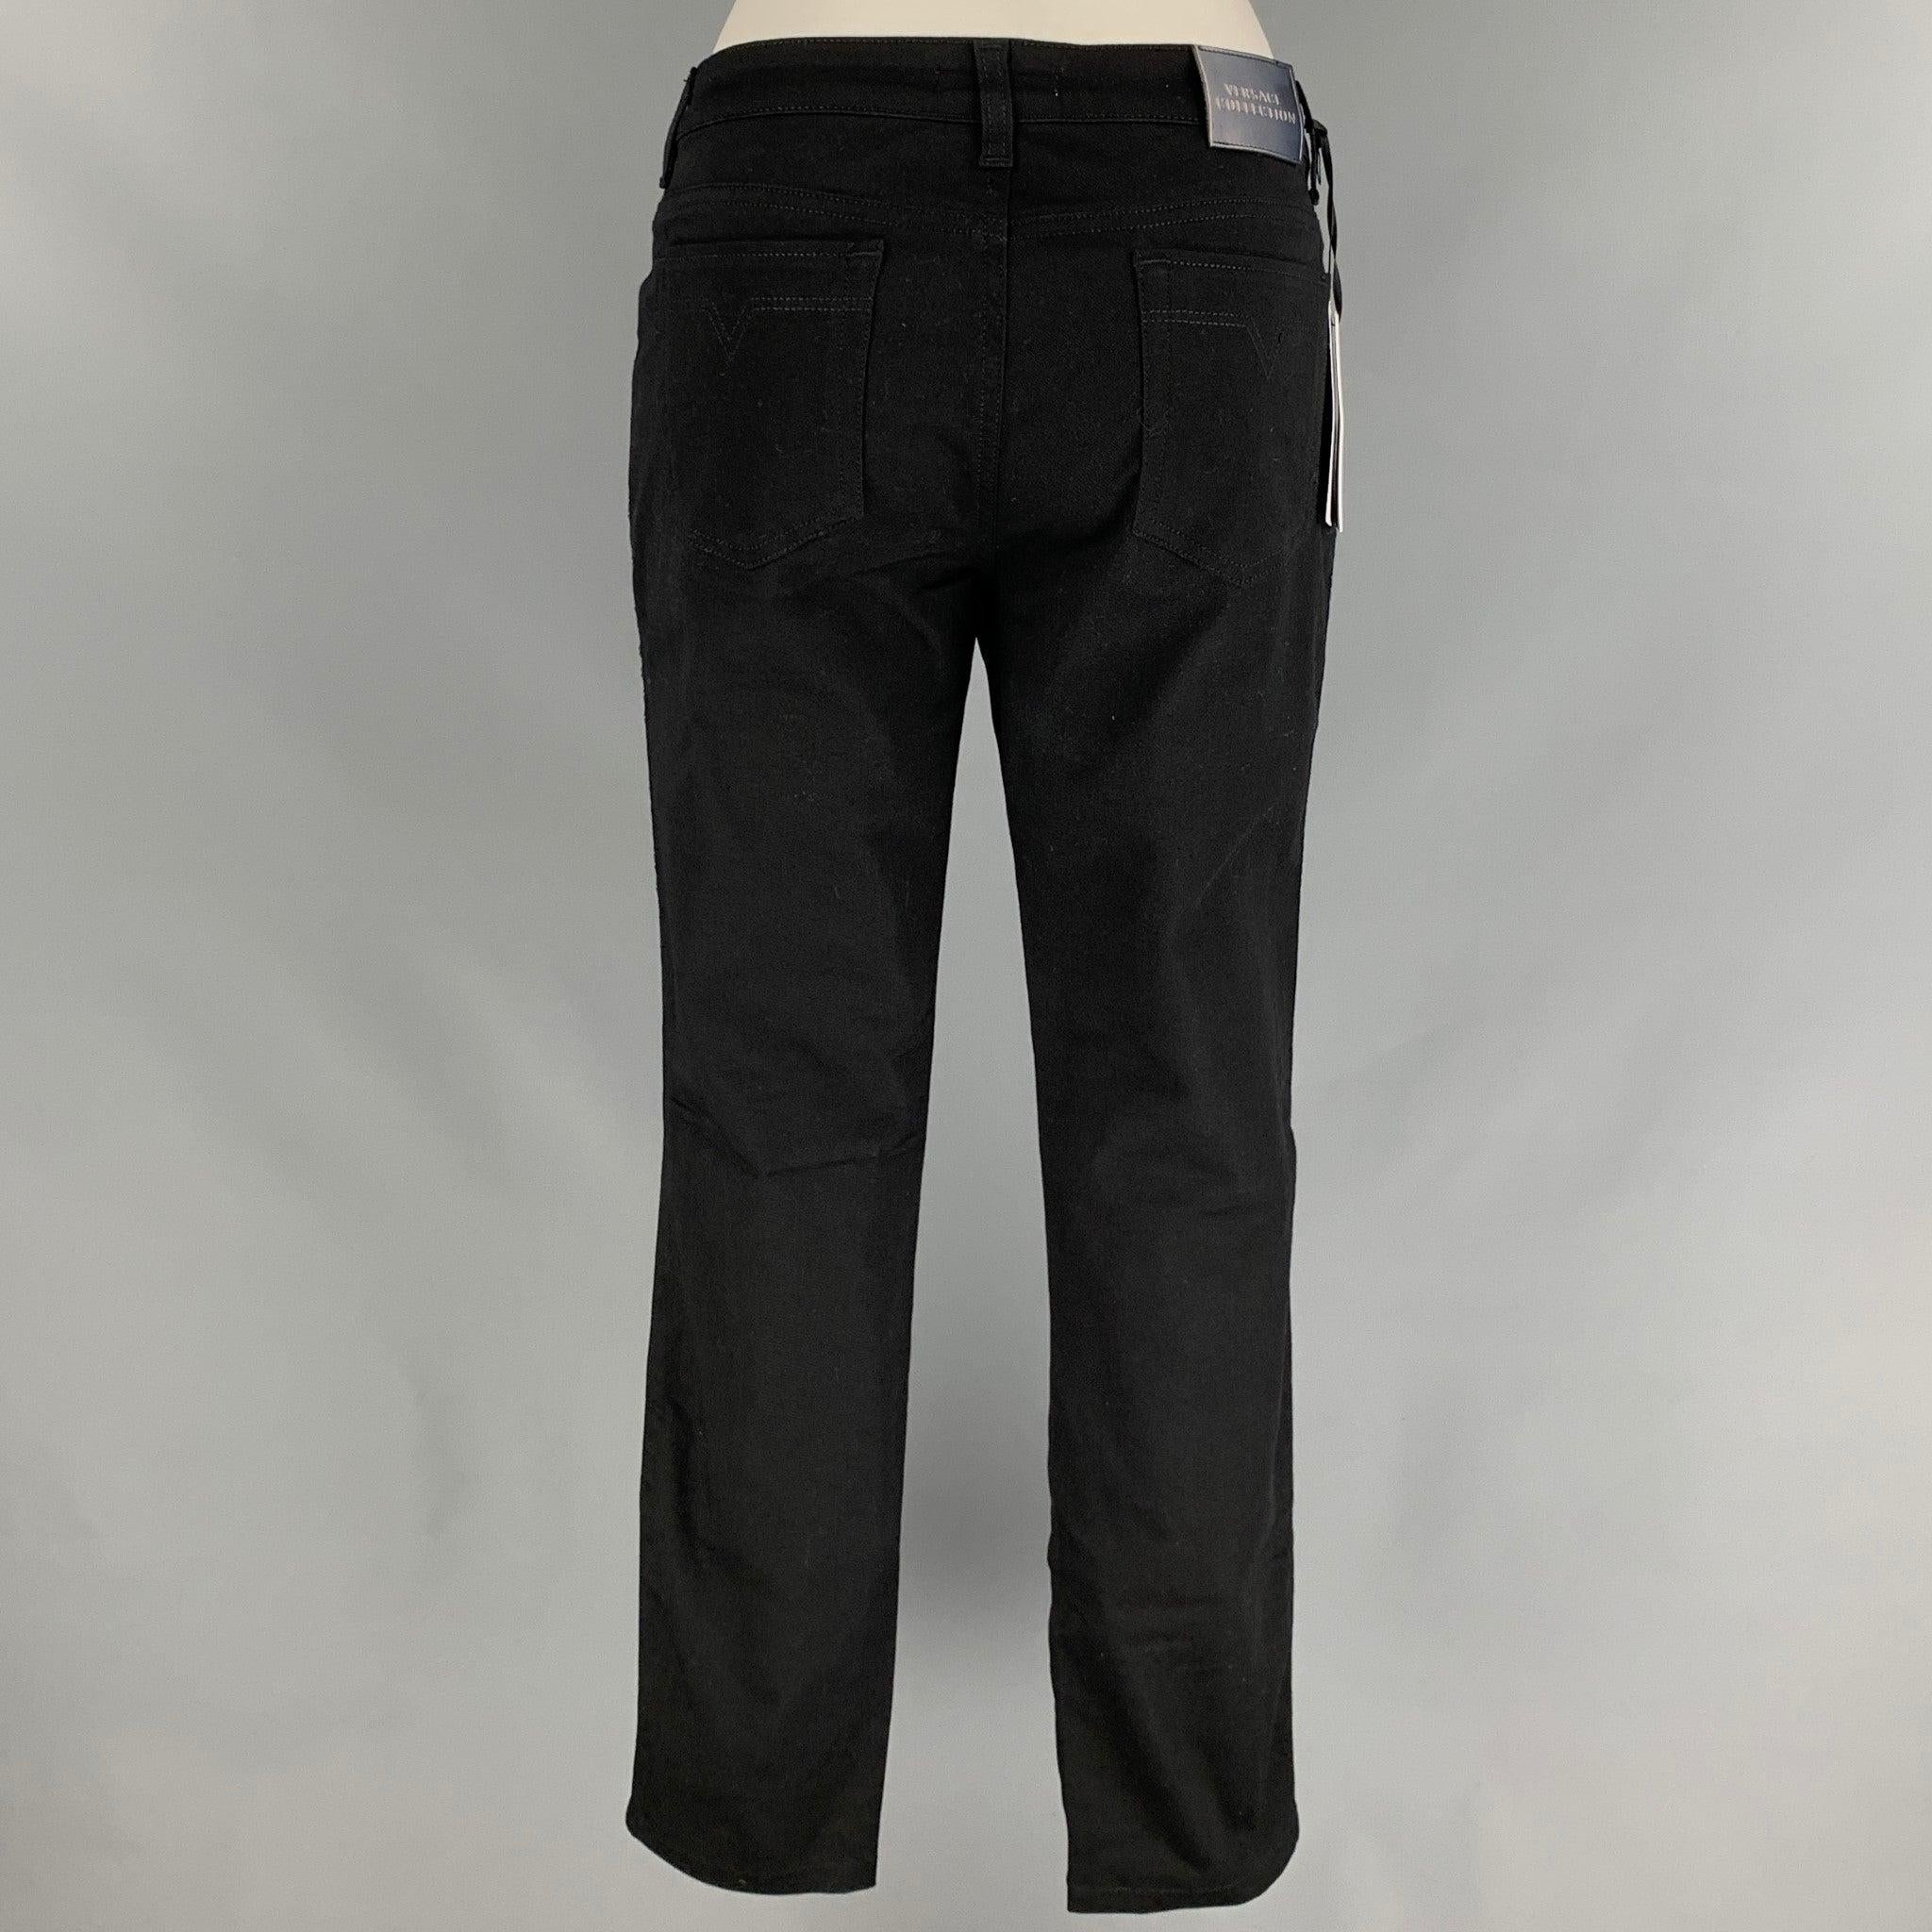 VERSACE COLLECTION Size 30 Black Cotton Blend Studded Skinny Casual Pants In Good Condition For Sale In San Francisco, CA